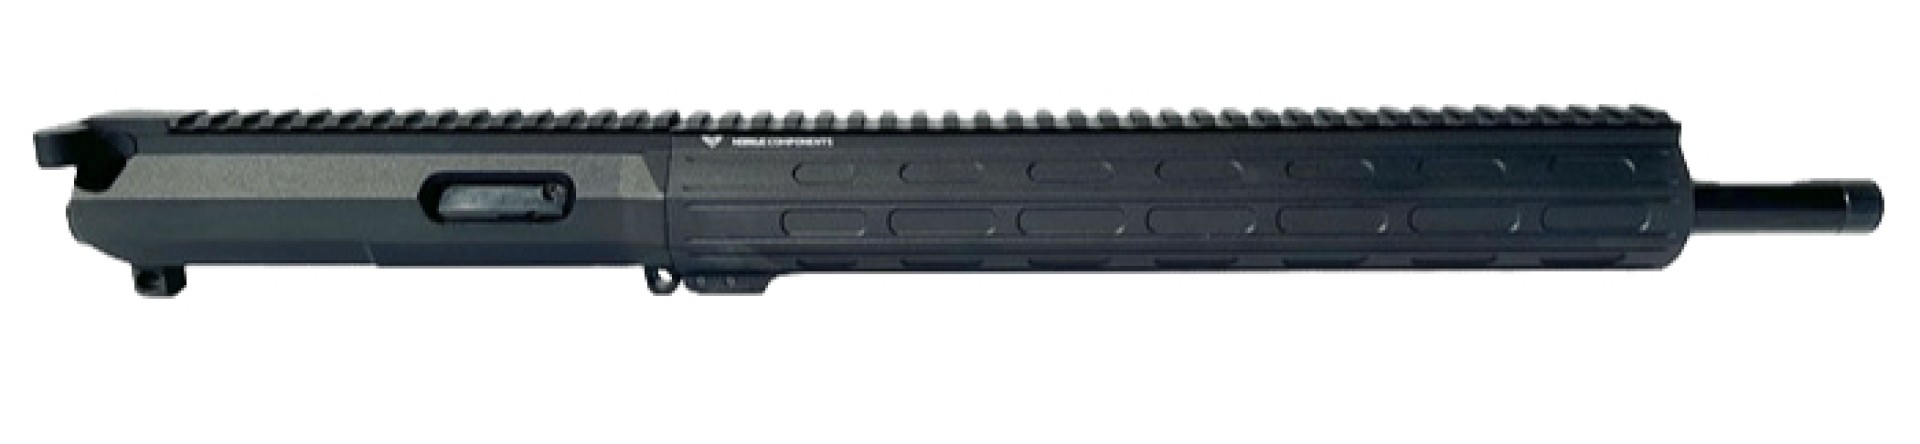 22RB DEDICATED 22 LONG RIFLE UPPER RECEIVER